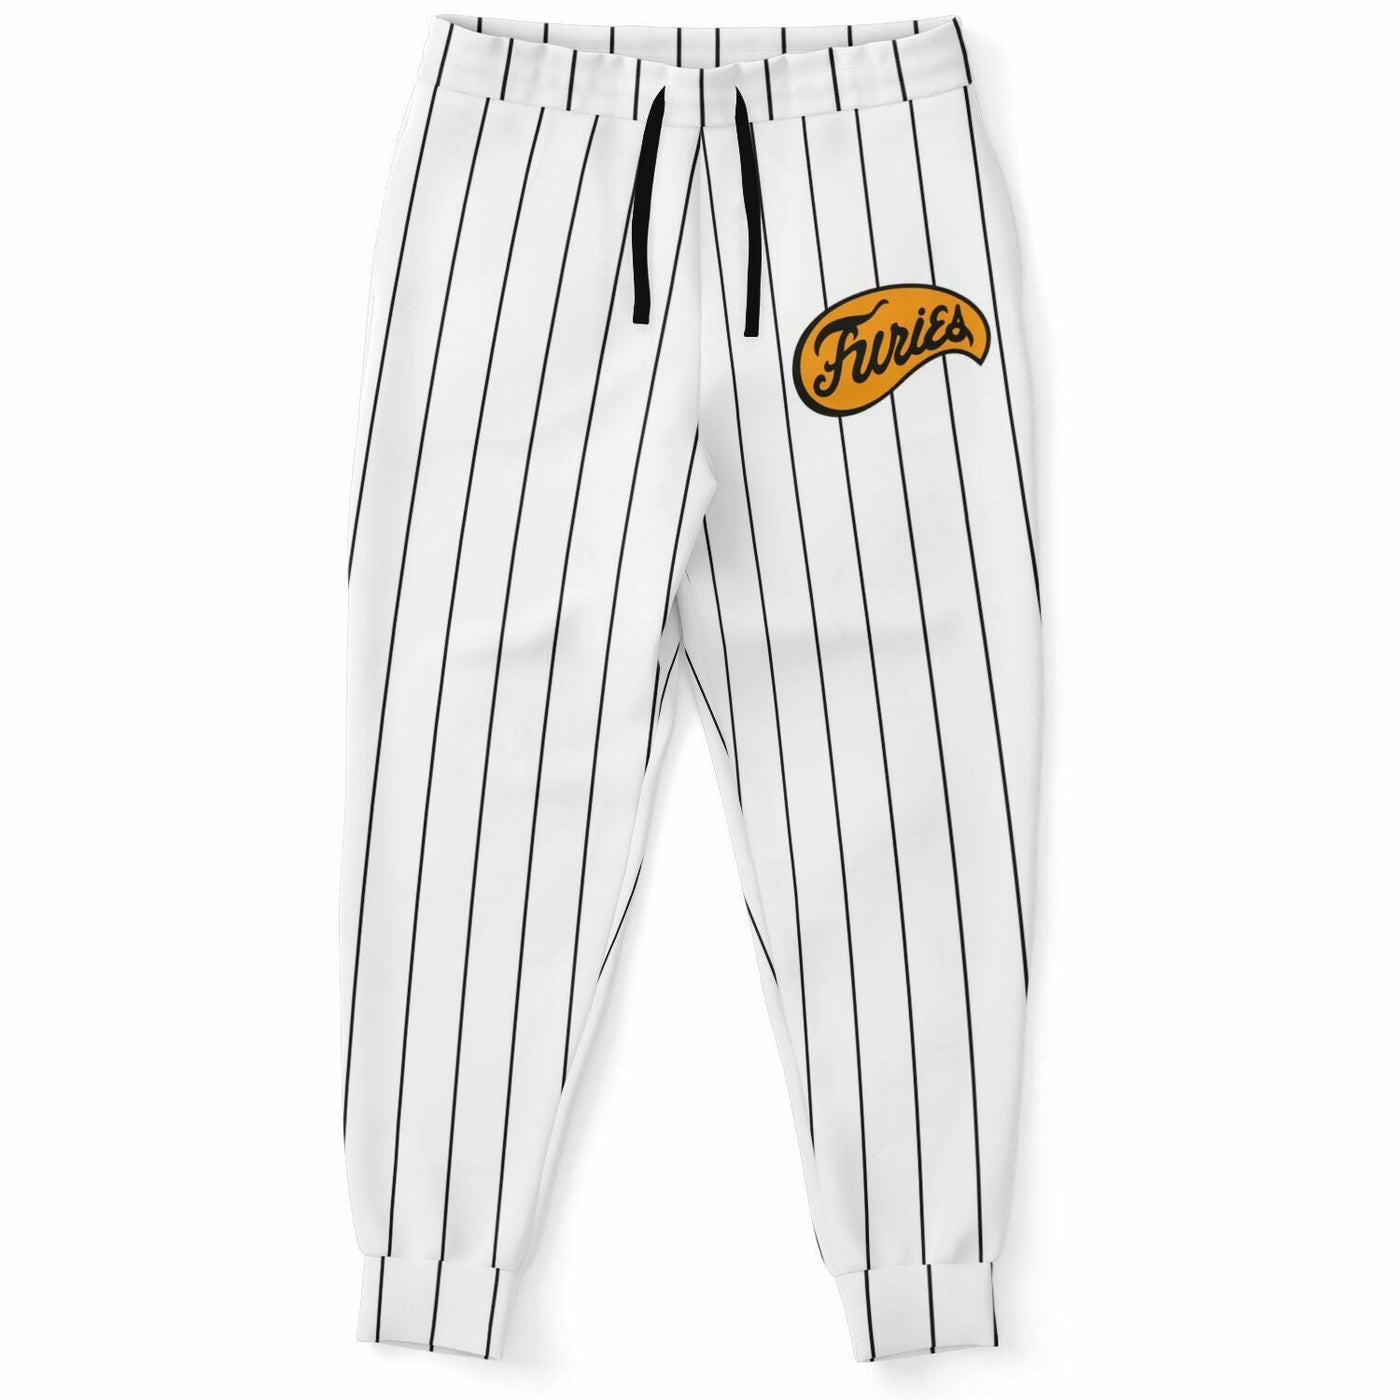 The Furies Athletic Joggers - The Warriors Riverside Baseball Gang